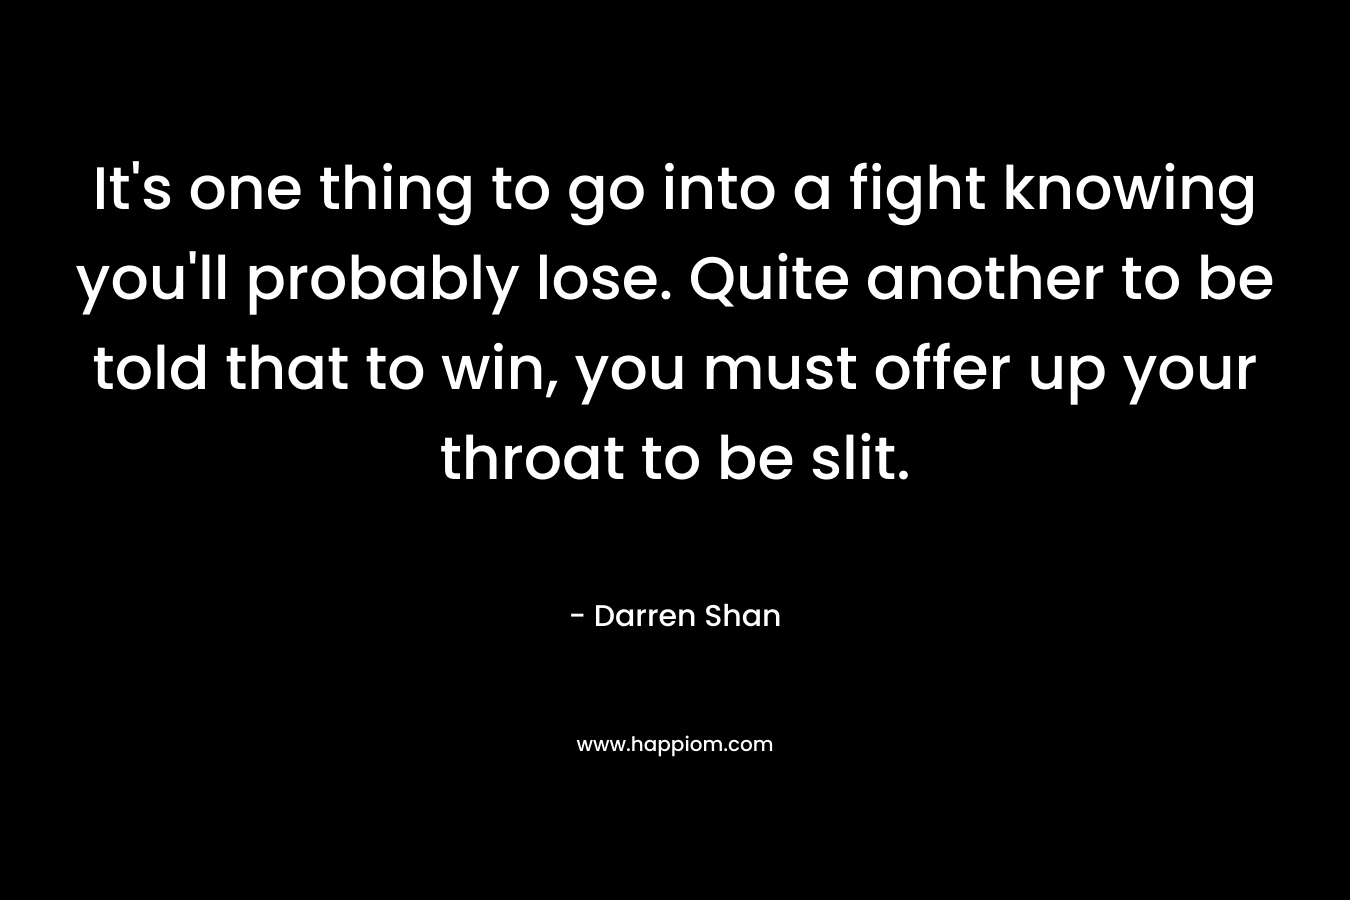 It's one thing to go into a fight knowing you'll probably lose. Quite another to be told that to win, you must offer up your throat to be slit.